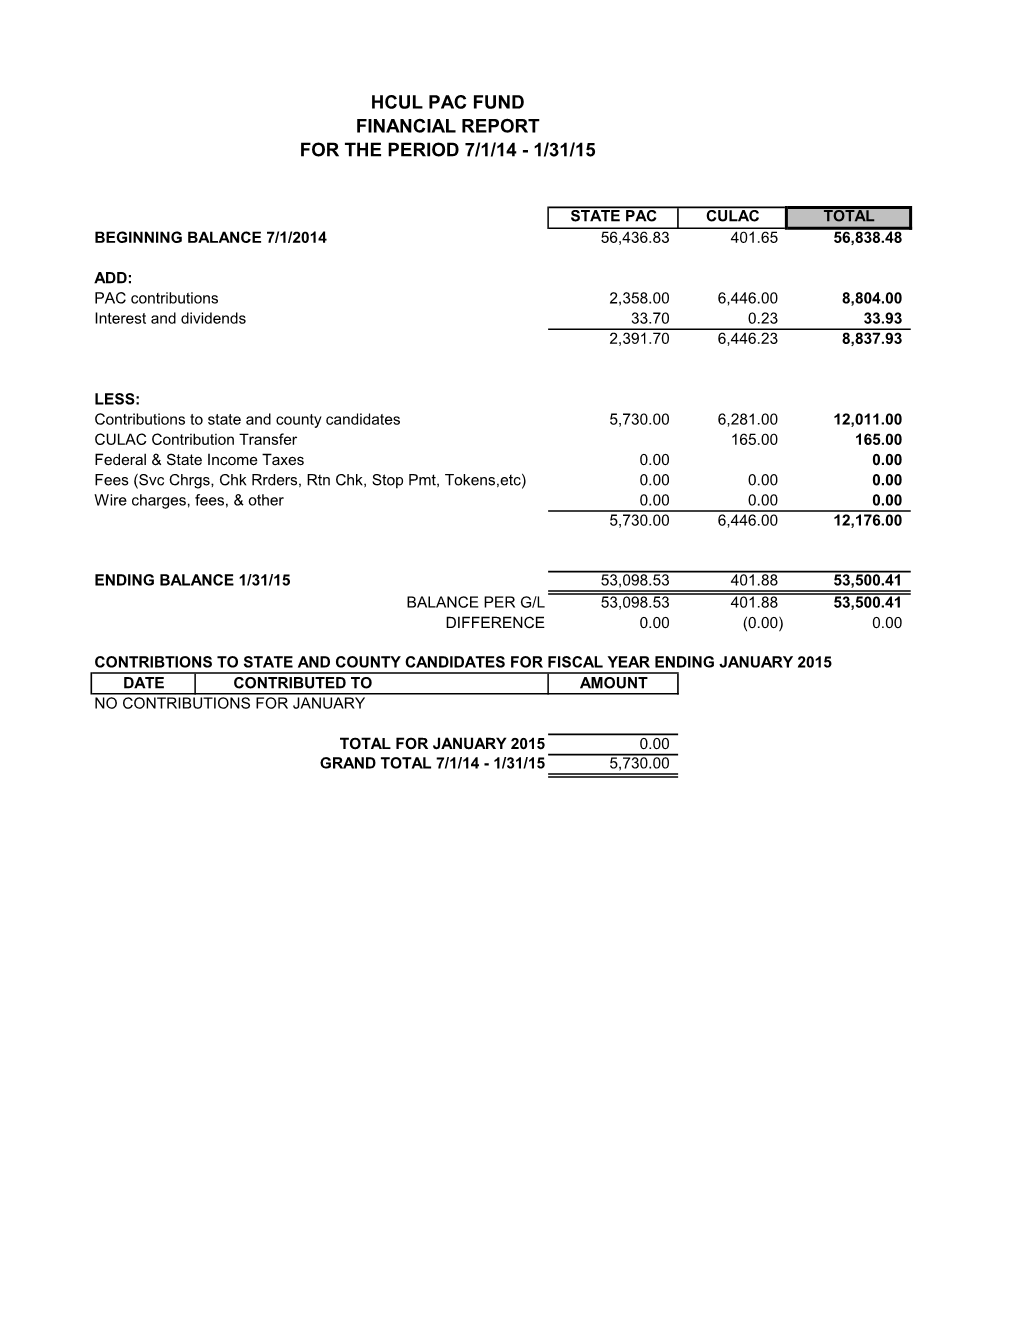 Hcul Pac Fund Financial Report for the Period 7/1/14 - 1/31/15